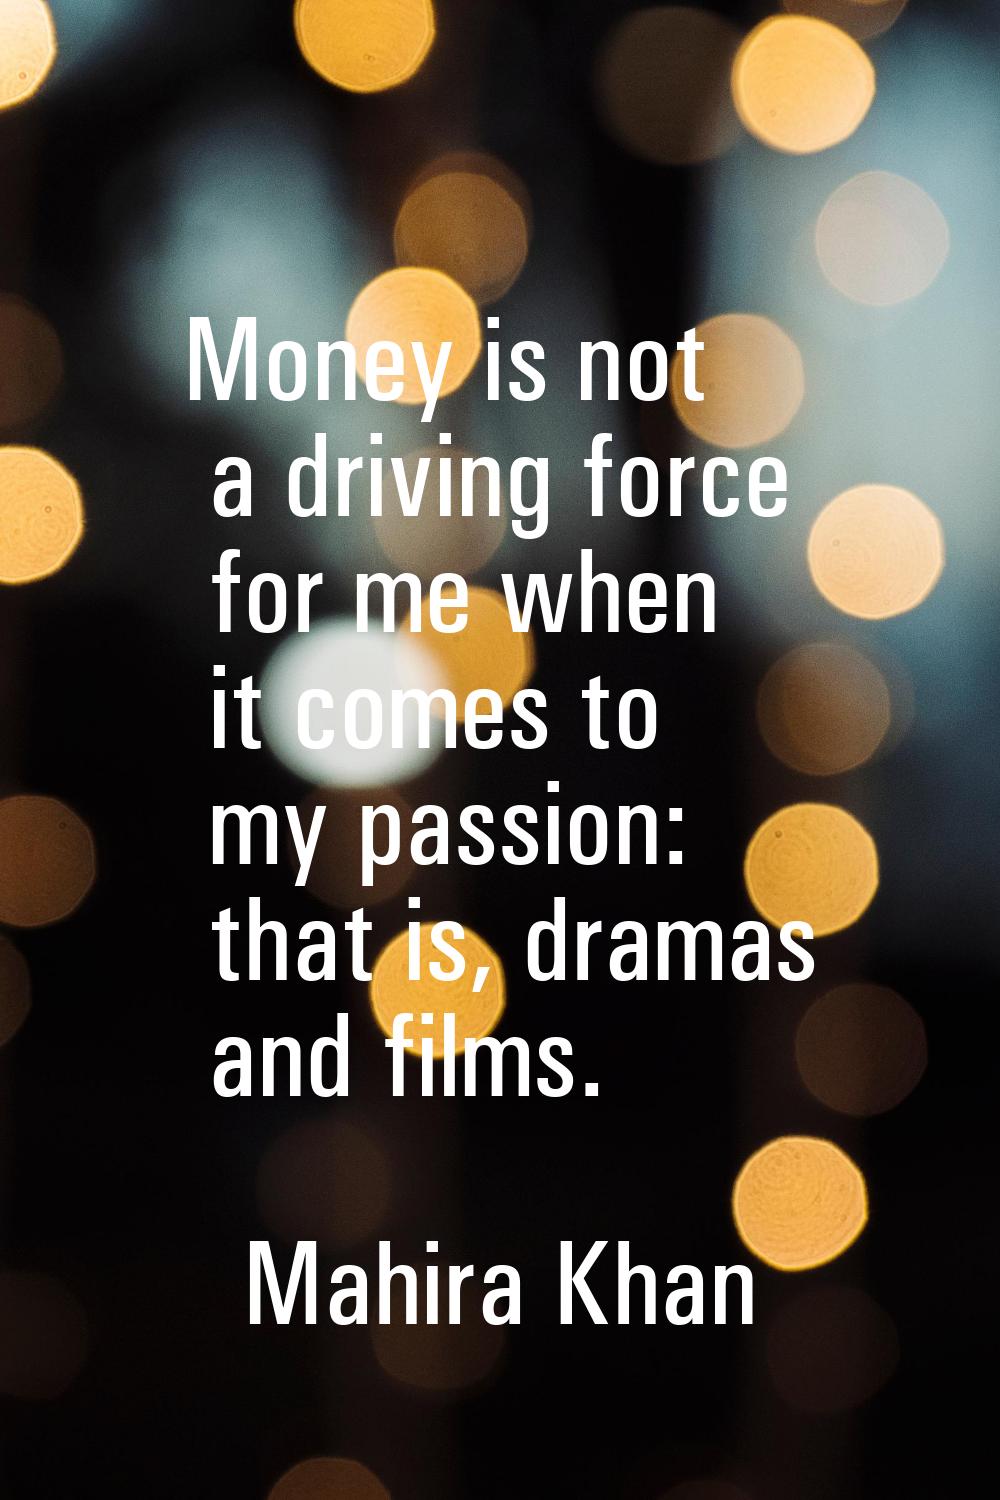 Money is not a driving force for me when it comes to my passion: that is, dramas and films.